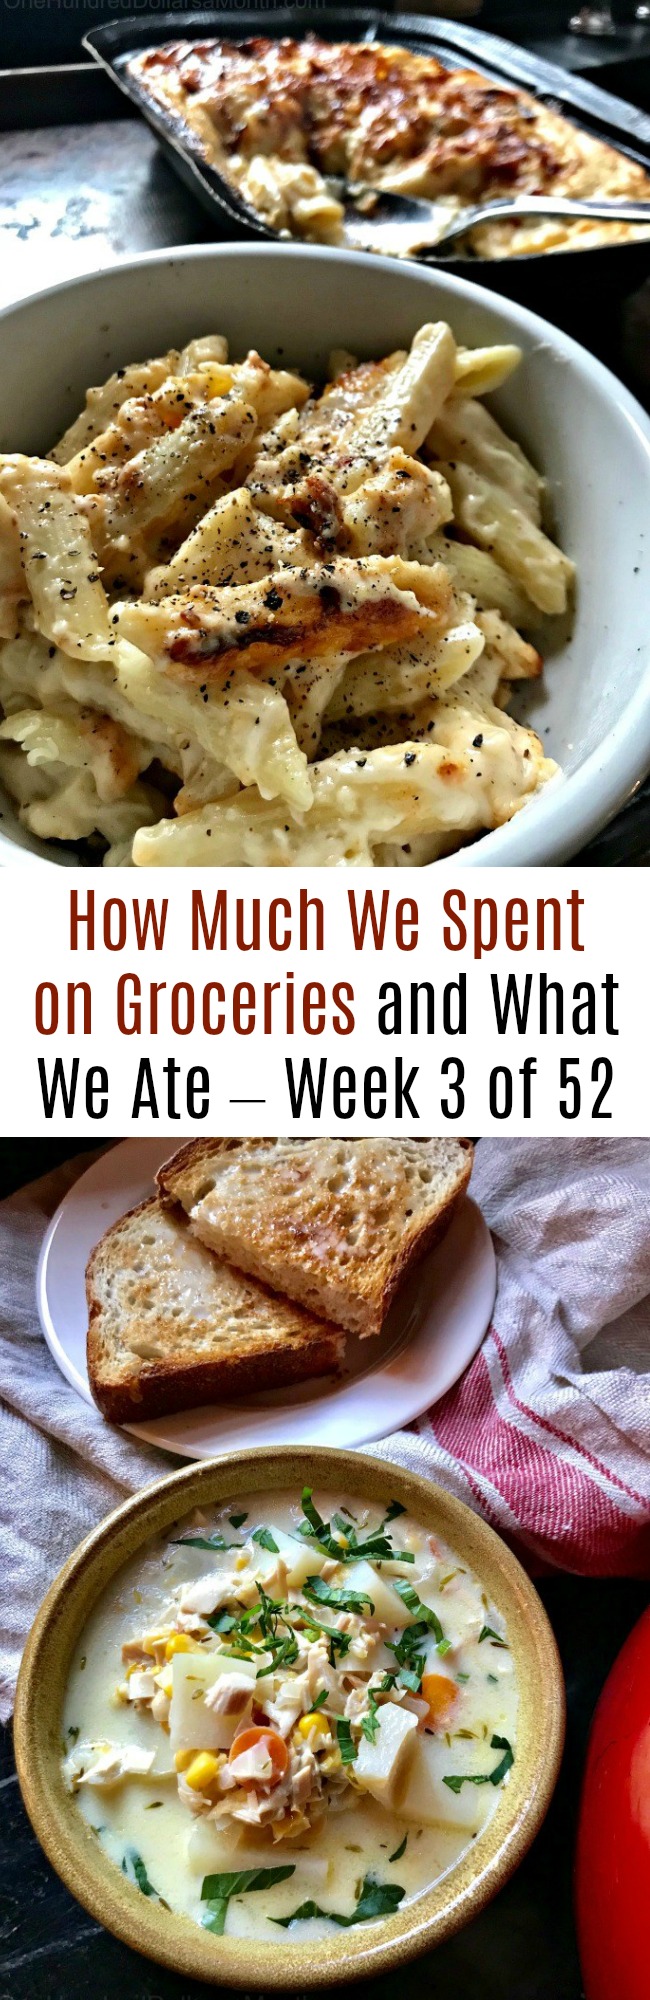 How Much We Spent on Groceries and What We Ate – Week 3 of 52